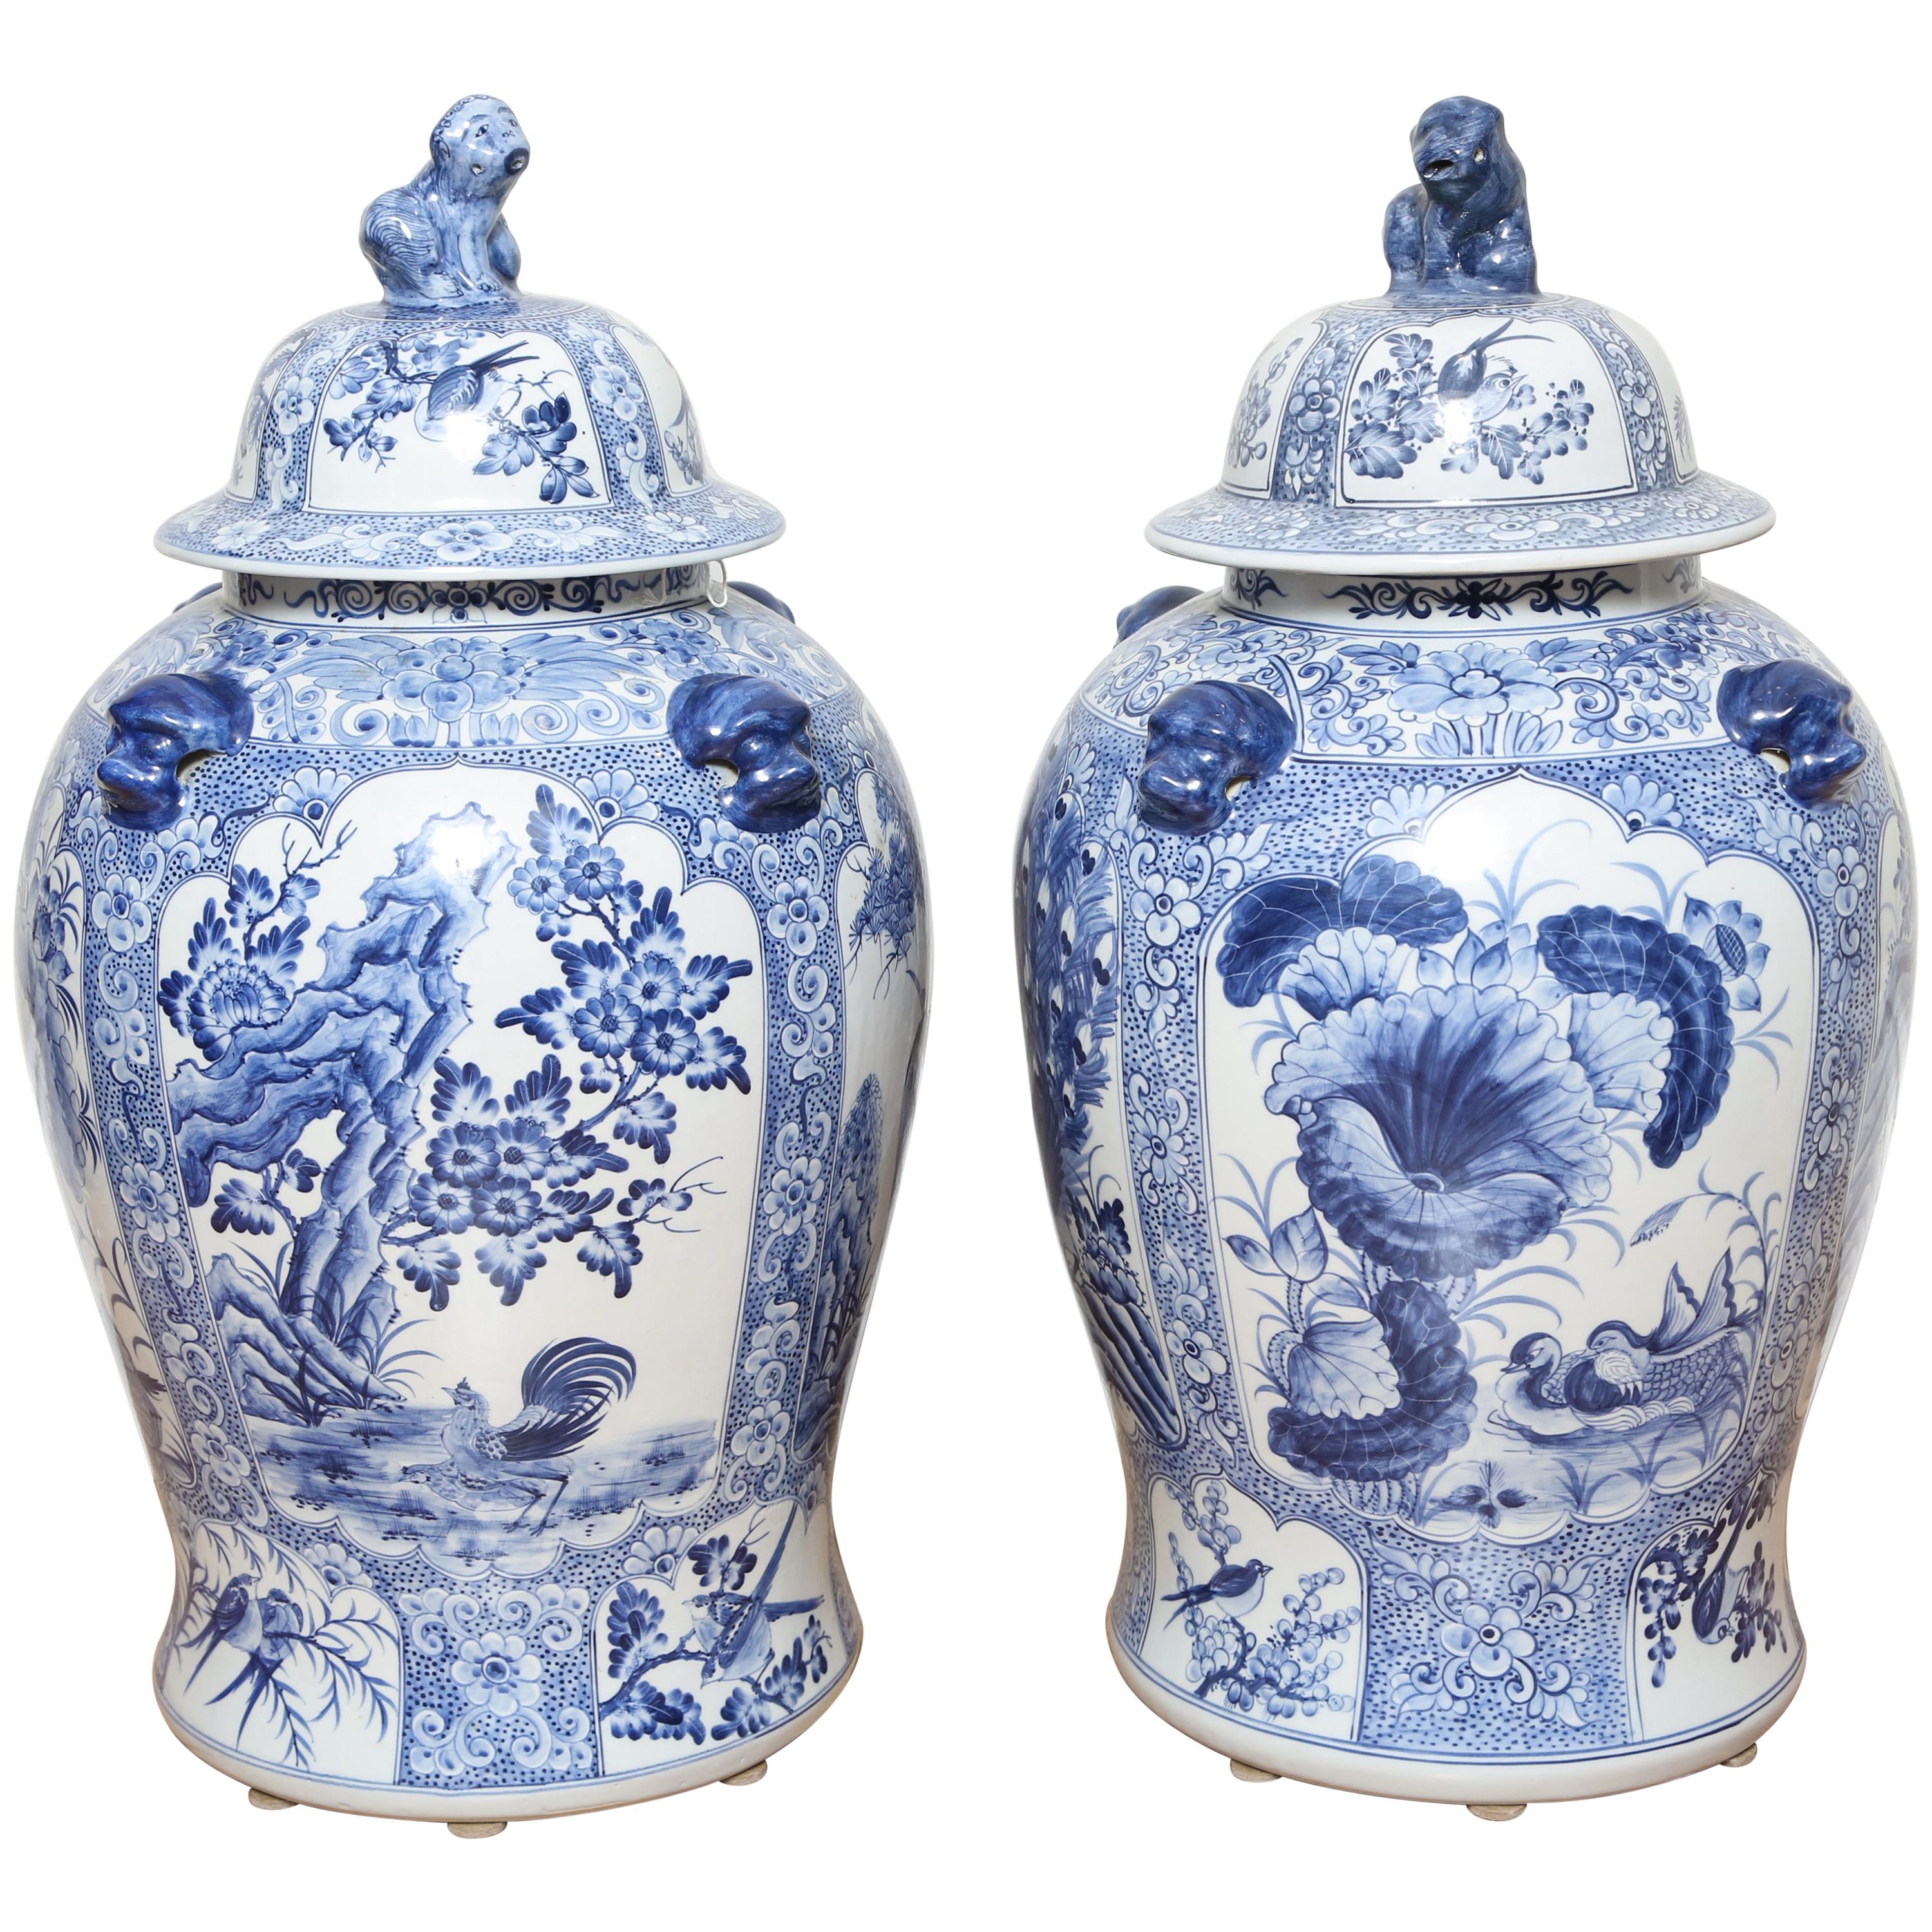 Monumental Pair of Blue and White Chinese Ginger Jars